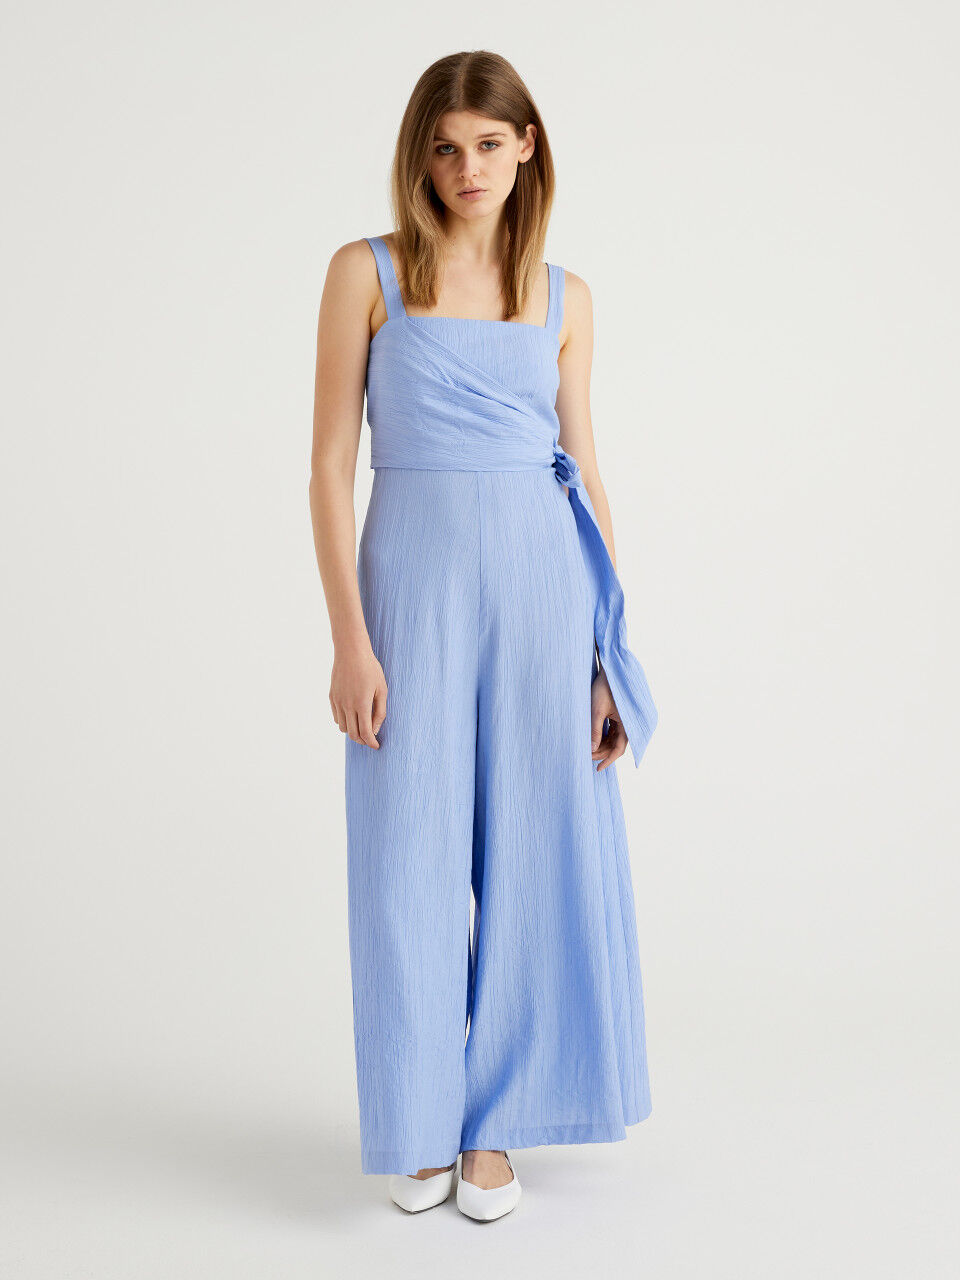 Women's Dresses and Jumpsuits New Collection 2022 | Benetton